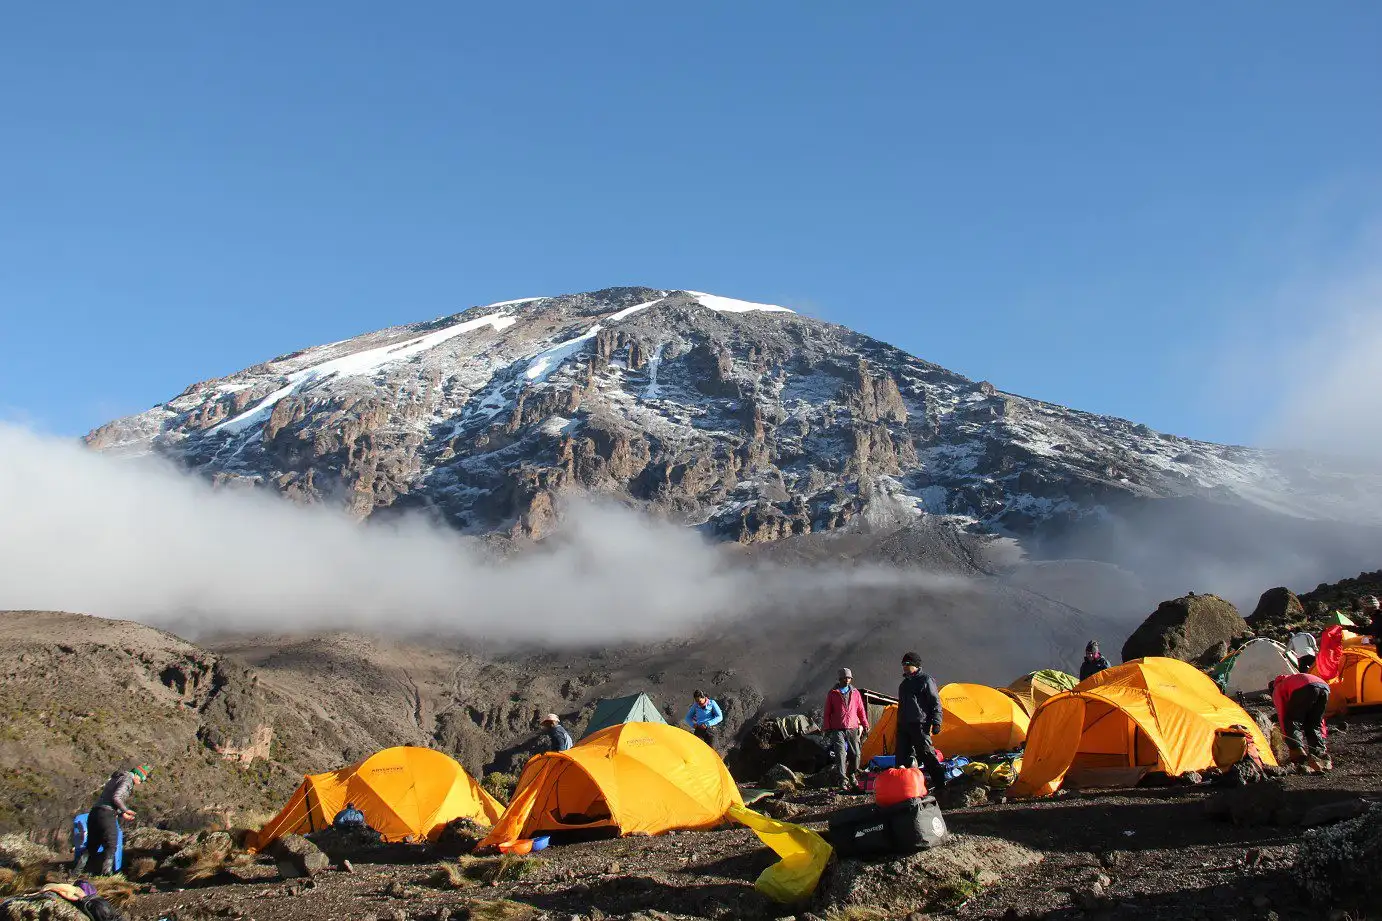 Lemosho Route 7 days Itinerary, Prices & Dates, What Is The Best Down Jacket For Climbing Kilimanjaro? 10 Reasons Why You Can't Climb Mt Kilimanjaro in a Day, Kilimanjaro Experience | Highest Mountain in Africa, Oldest Person To Climb Kilimanjaro, Best Tour Operators in Tanzania, 6 Days Shira route, How high is Mount Kilimanjaro? Everything you need to know, The 10 Biggest Misconceptions About Climbing Kilimanjaro, Do I Need a Camp Pillow for Climbing Kilimanjaro, Kilimanjaro Climb and Safari Packages, How To Prepare For Climbing Mount Kilimanjaro, Food on Kilimanjaro, Which is Harder Inca Trail or Kilimanjaro? Kilimanjaro Inspiring Stories, Natural Foods and Supplements, Kilimanjaro Books That Transport You To The Roof Of Africa, Climbing Kilimanjaro in September, Why do prices differ between Kilimanjaro tour operators?, It is Important to Find Good Footwear for Kilimanjaro, What Plants and Trees Will I See on Mount Kilimanjaro?